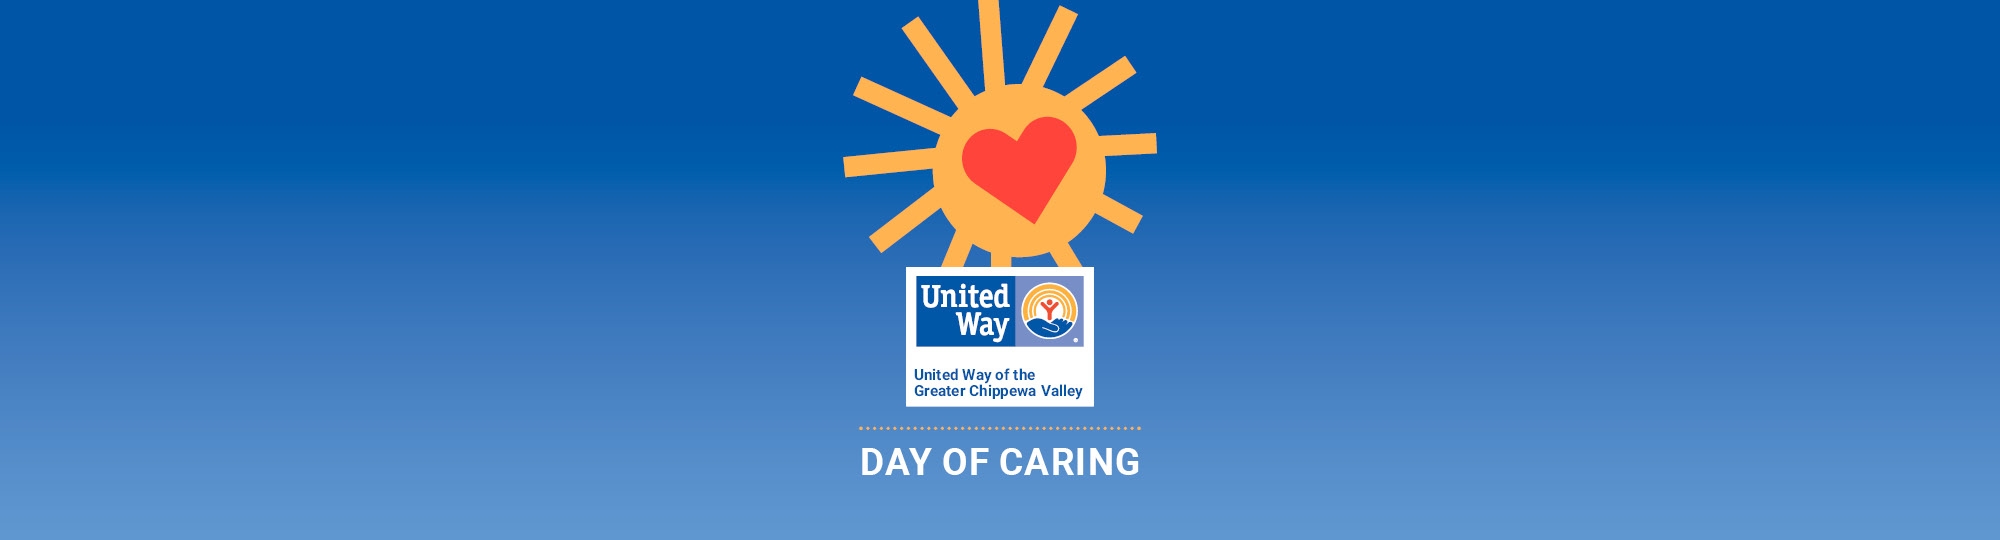 Day of Caring Web Banner with United Way logo